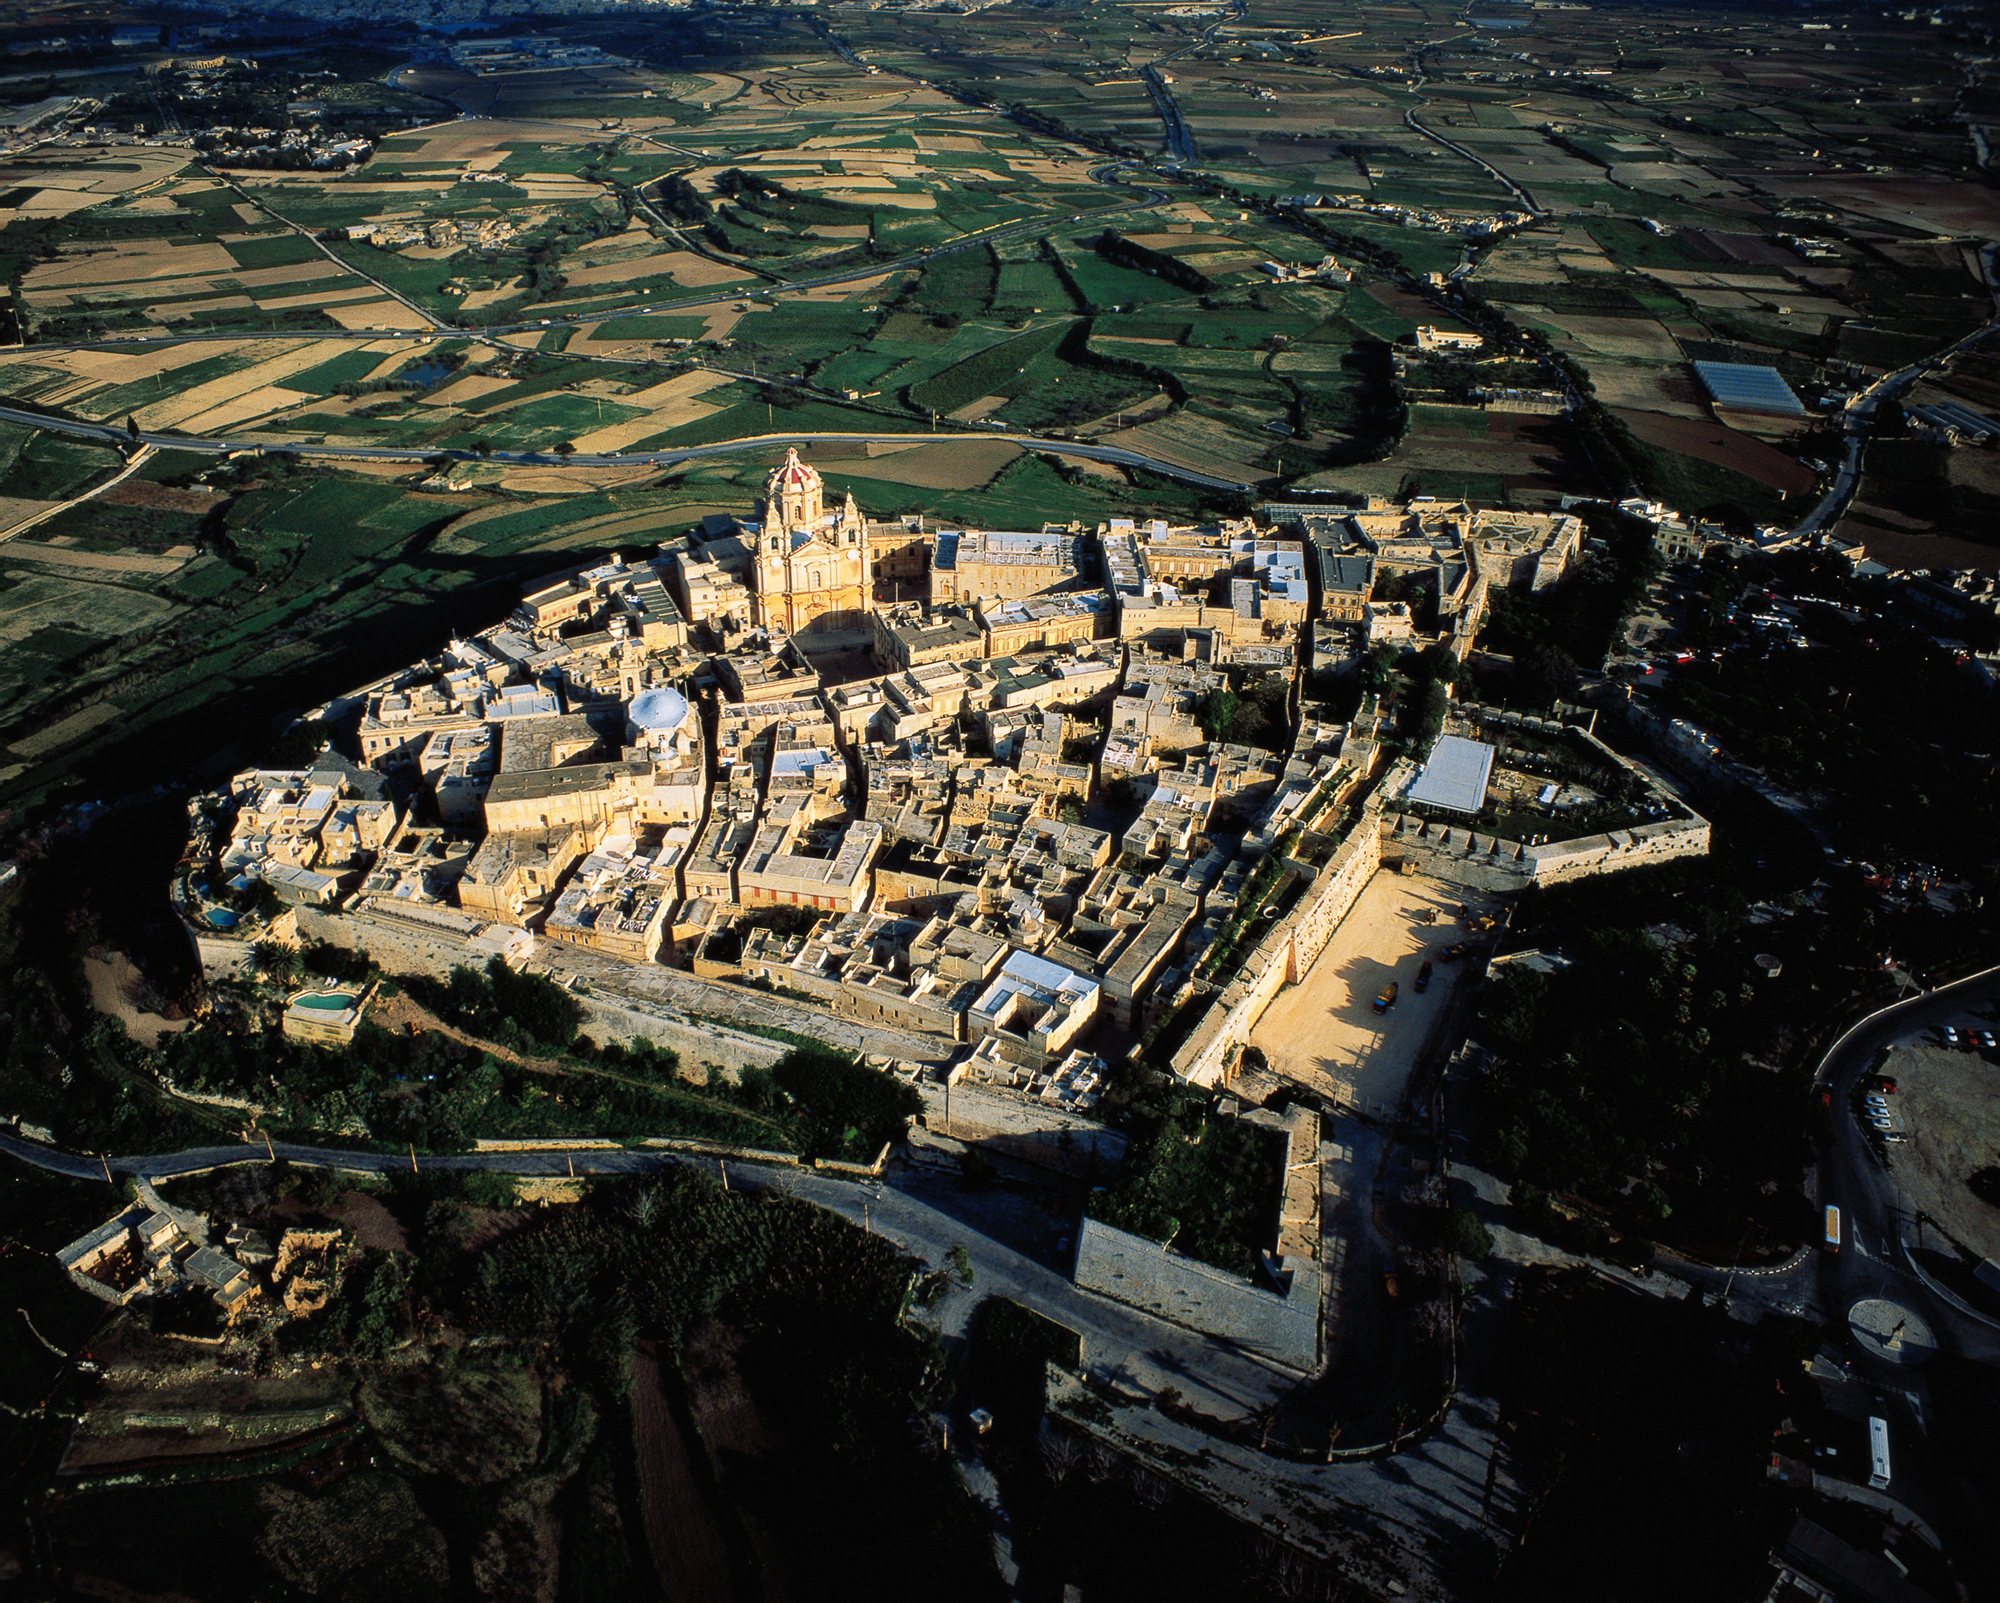 The fortified city of Mdina.